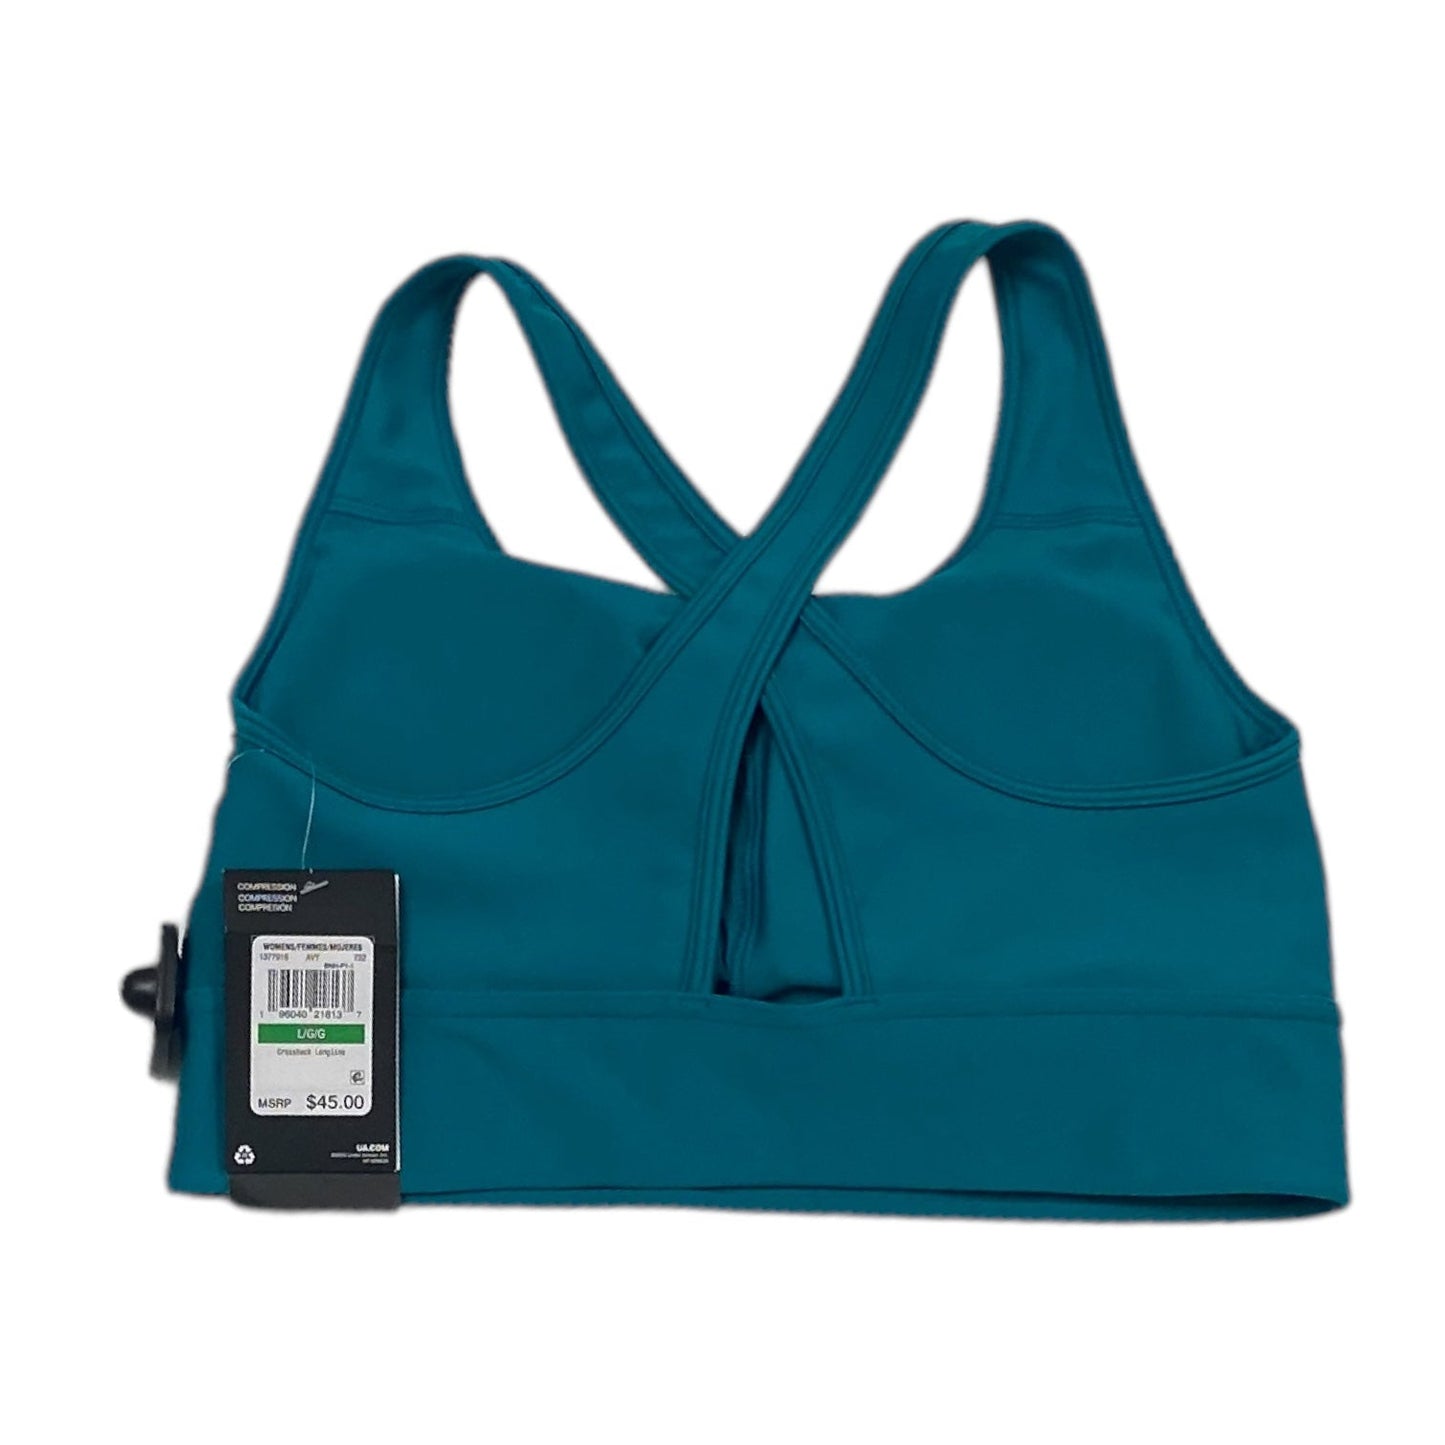 Teal Athletic Bra Under Armour, Size L